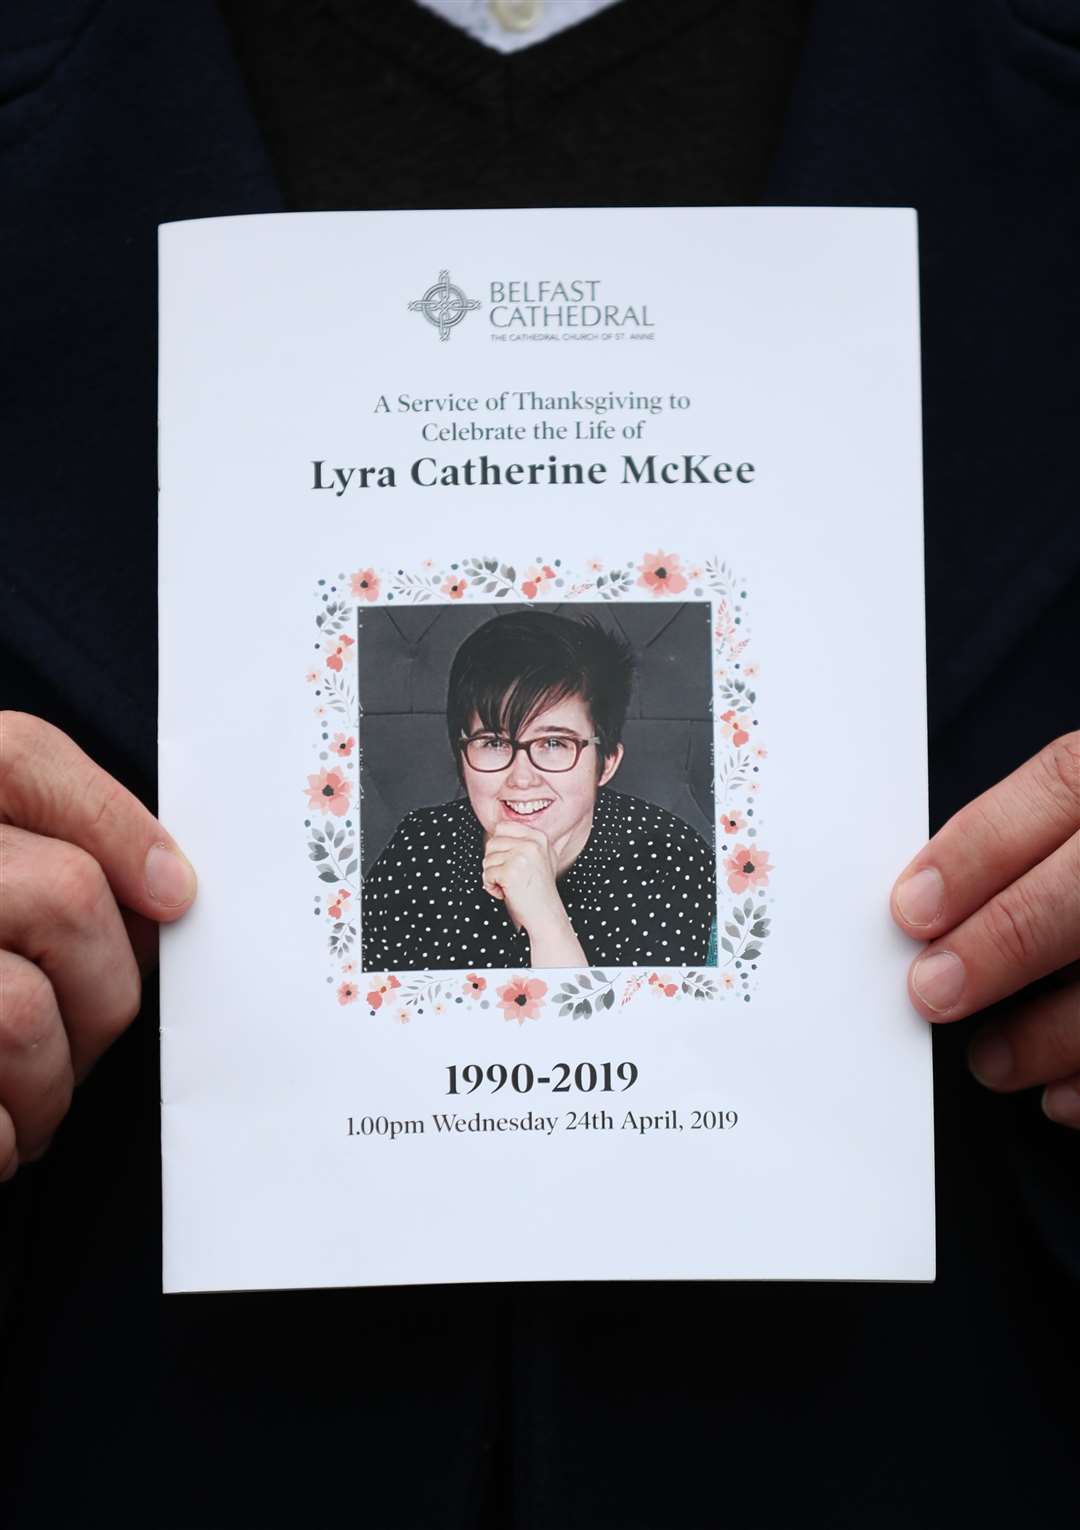 The Order of Service at the funeral of murdered journalist Lyra McKee (Liam McBurney/PA)